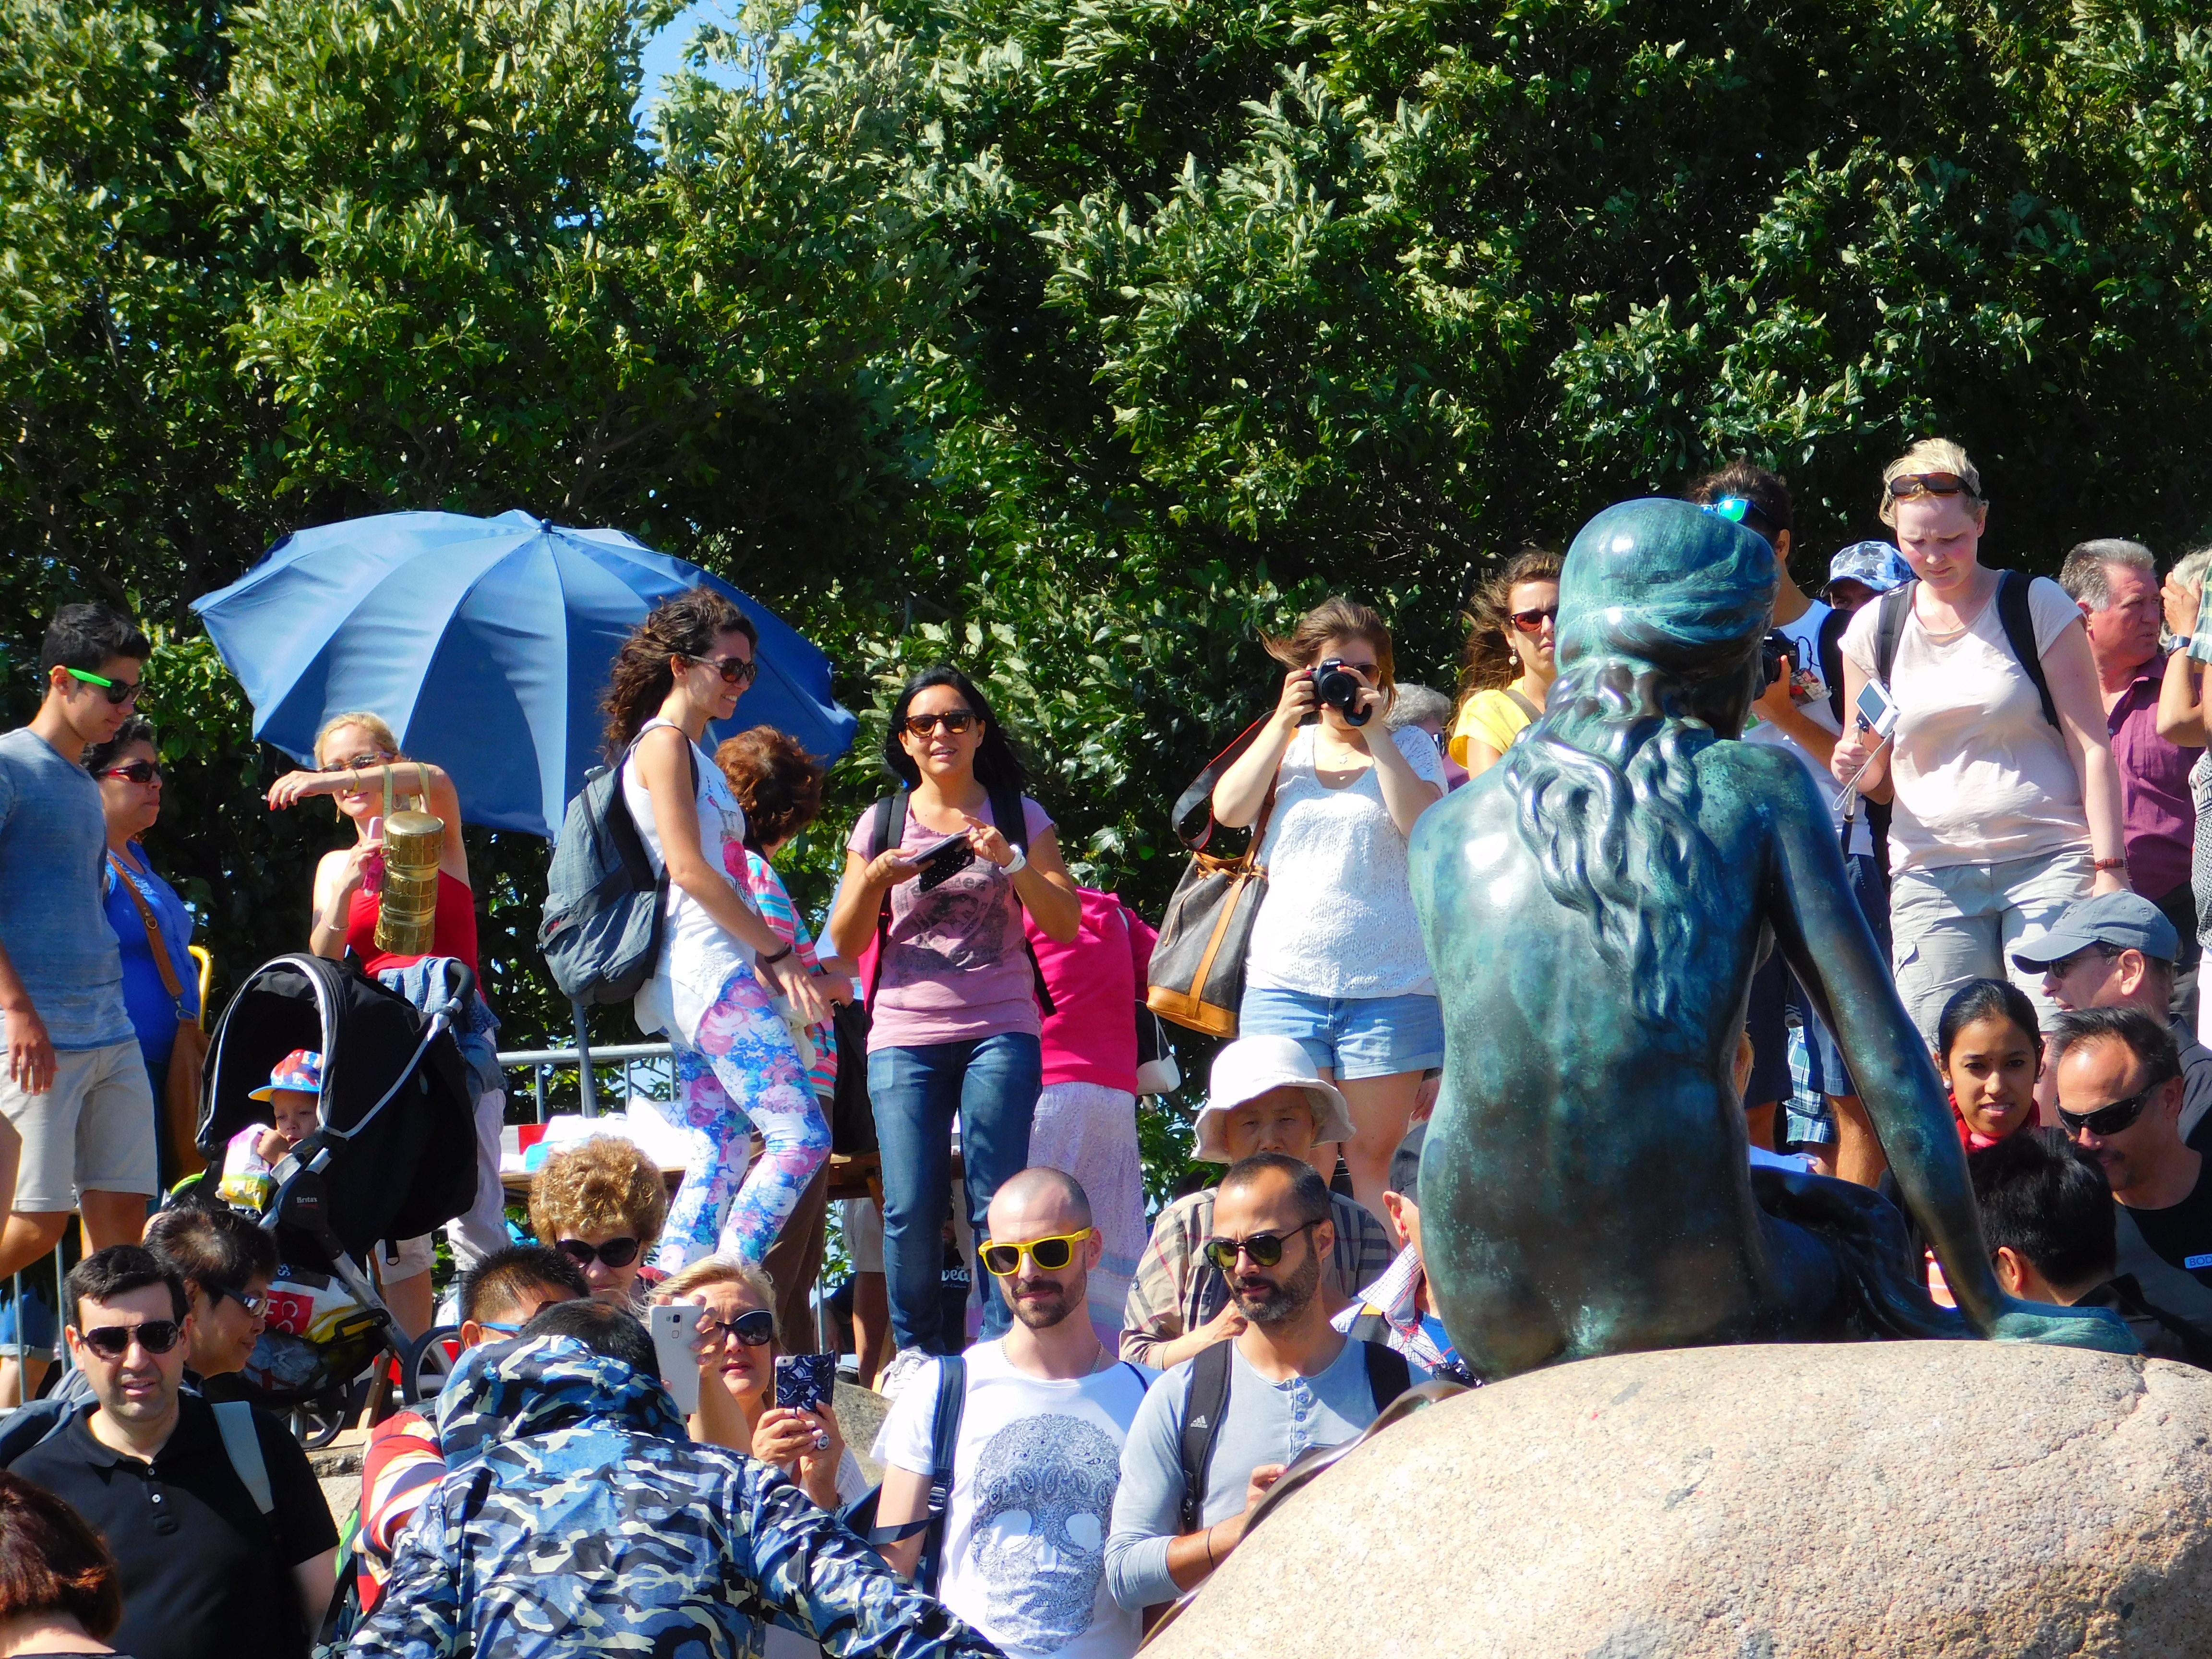 group of people beside the little mermaid statue photo during day time